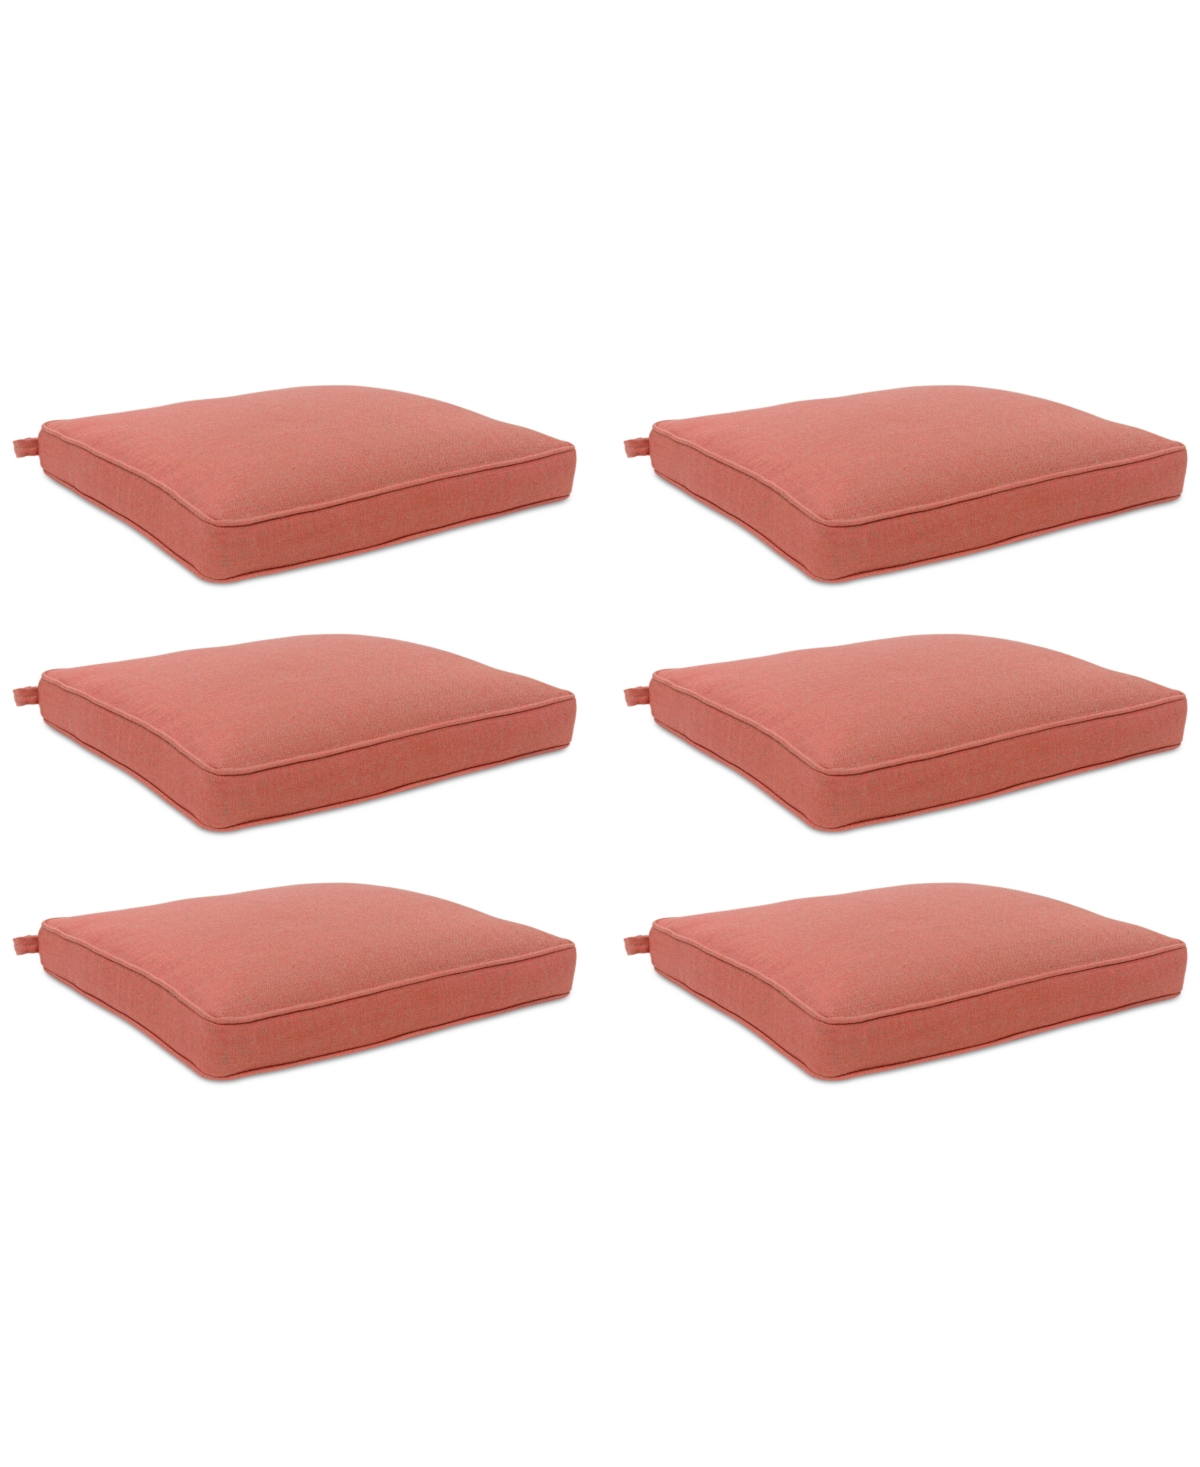 Agio Replacement Outdoor Dining Cushion, Set Of 6 In Peony Brick Red